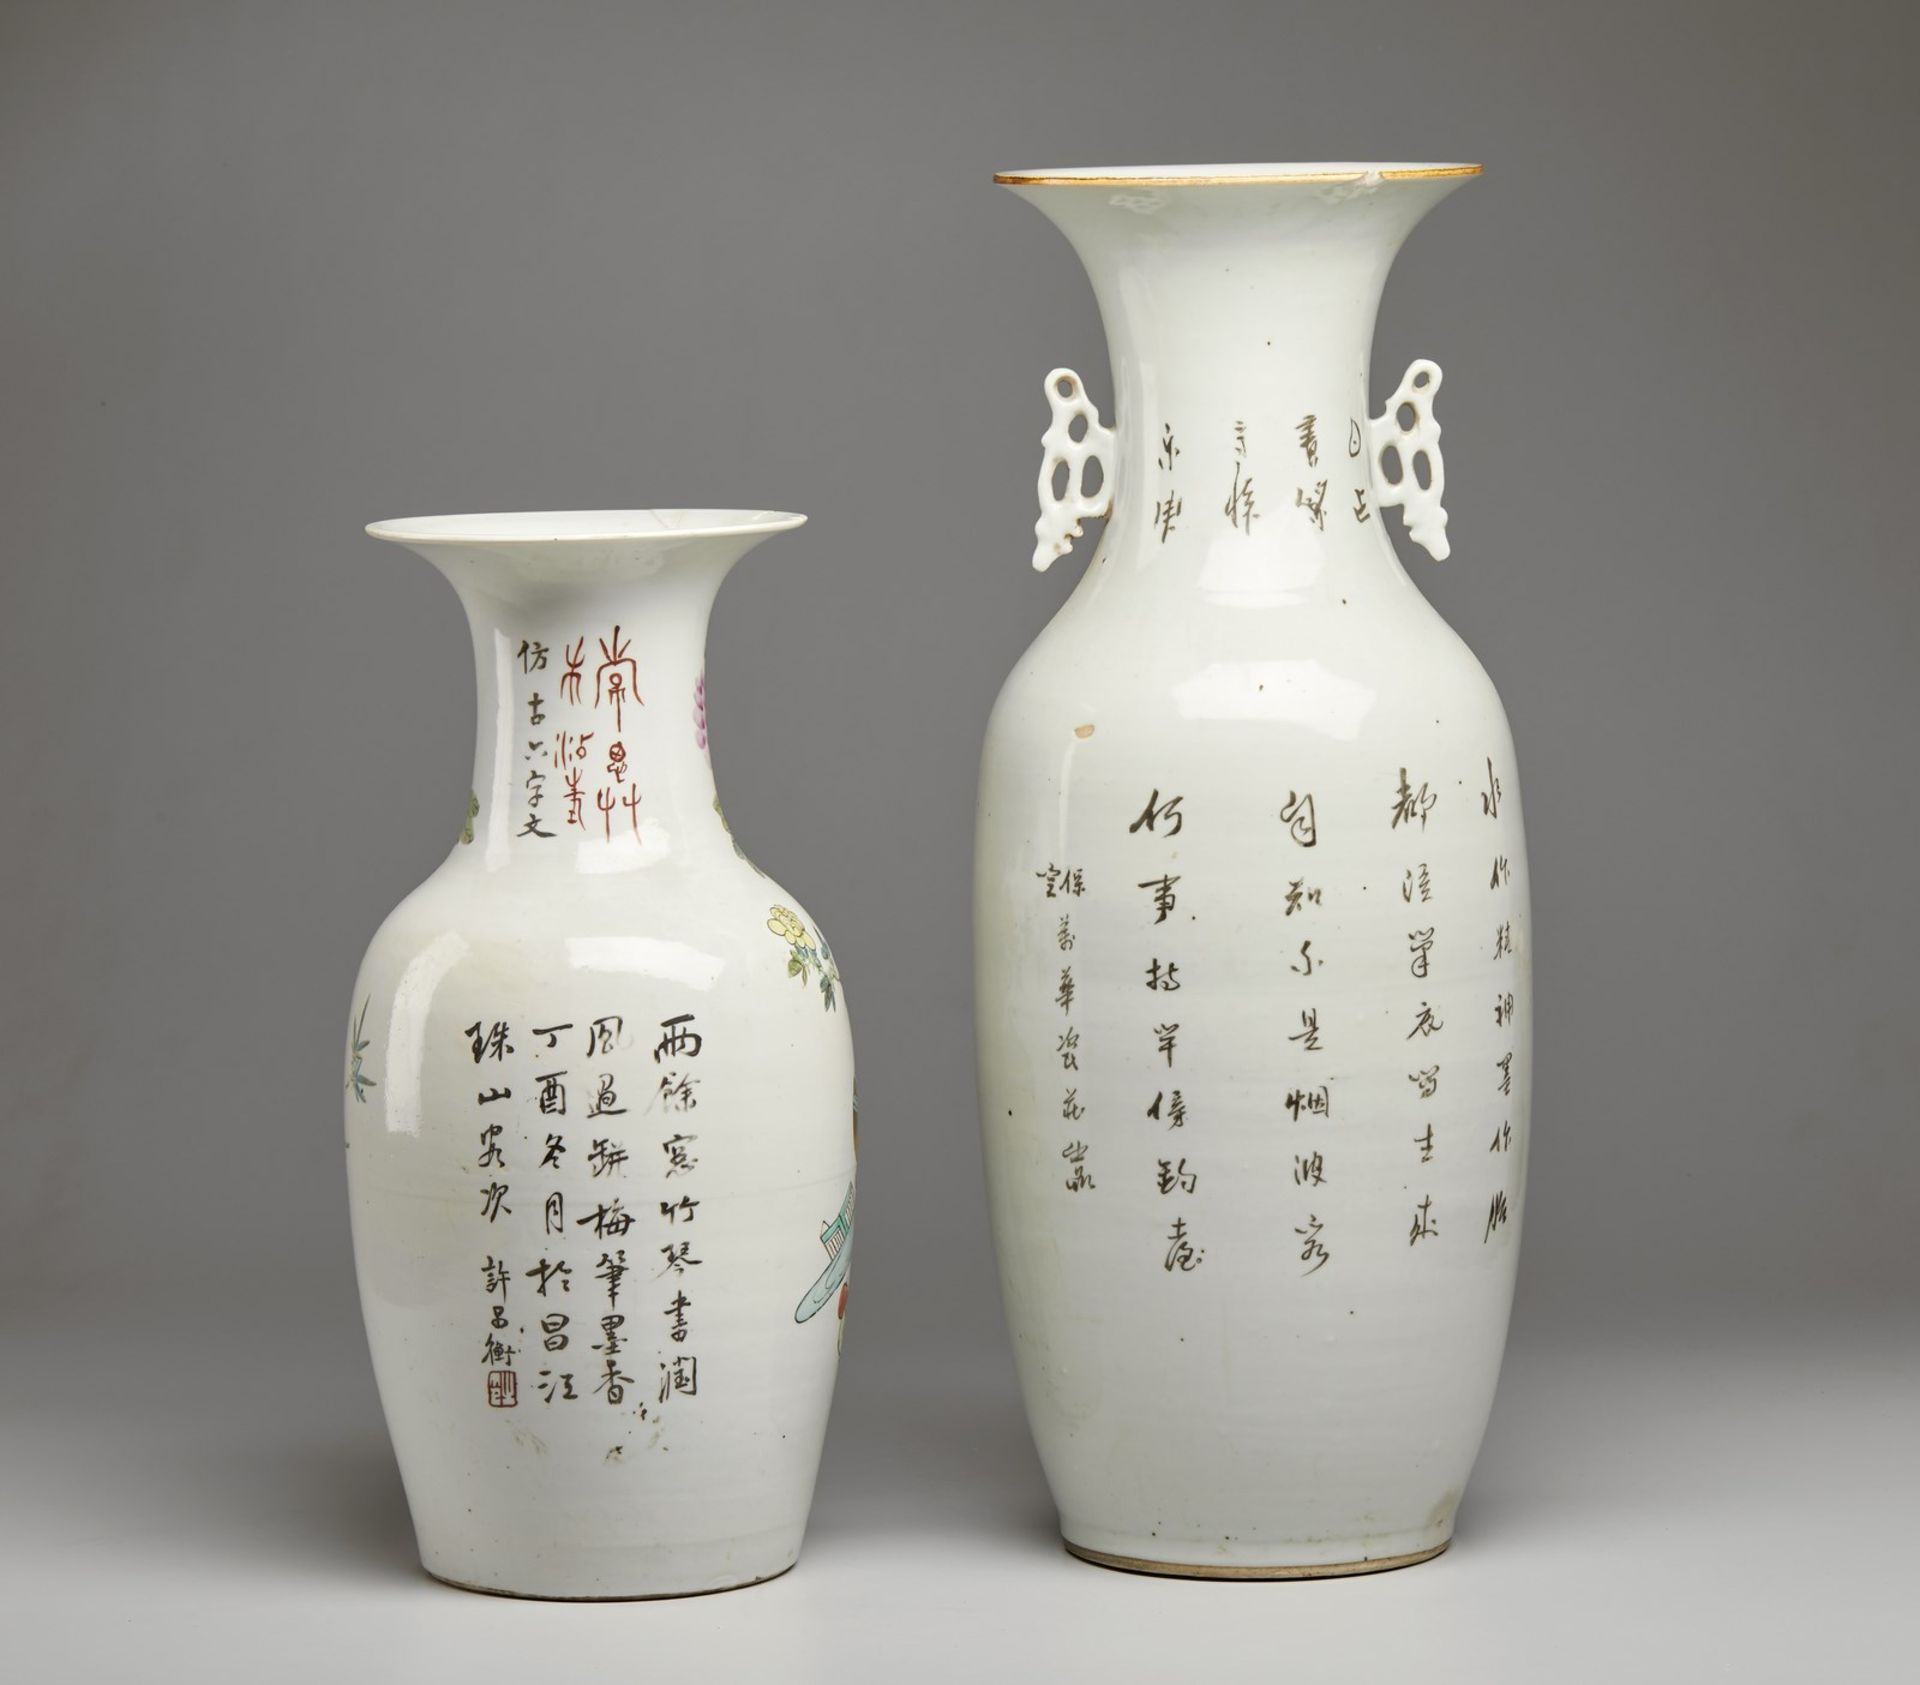 A pair of porcelain baluster vases with polychrome decoration China, first half 20th century - Image 2 of 3